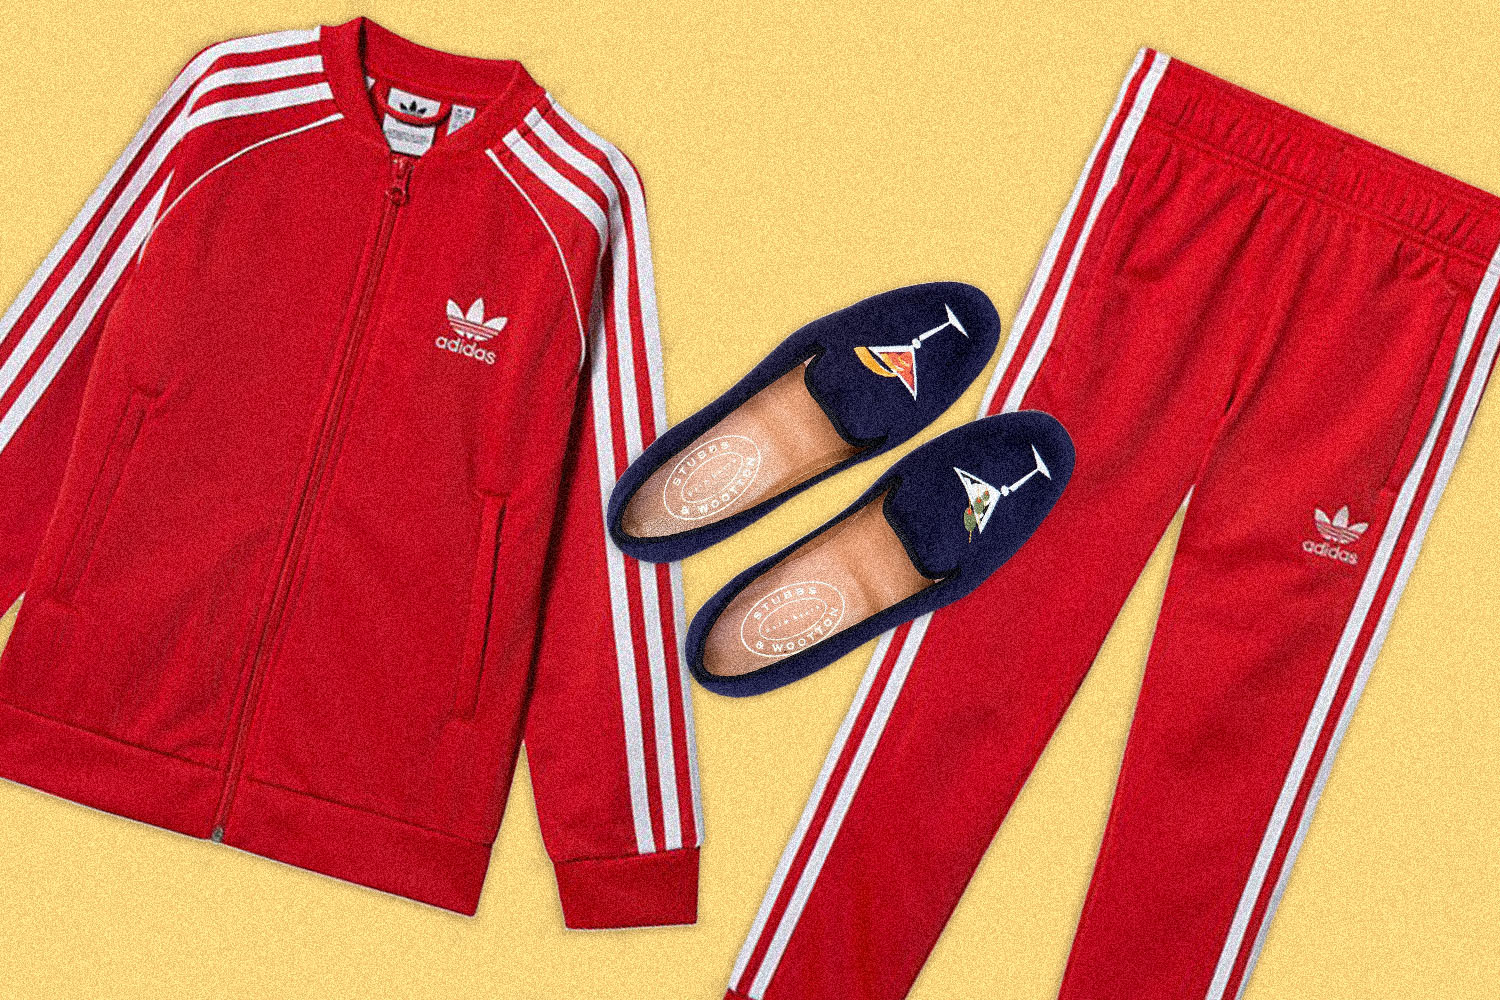 adidas outfit red